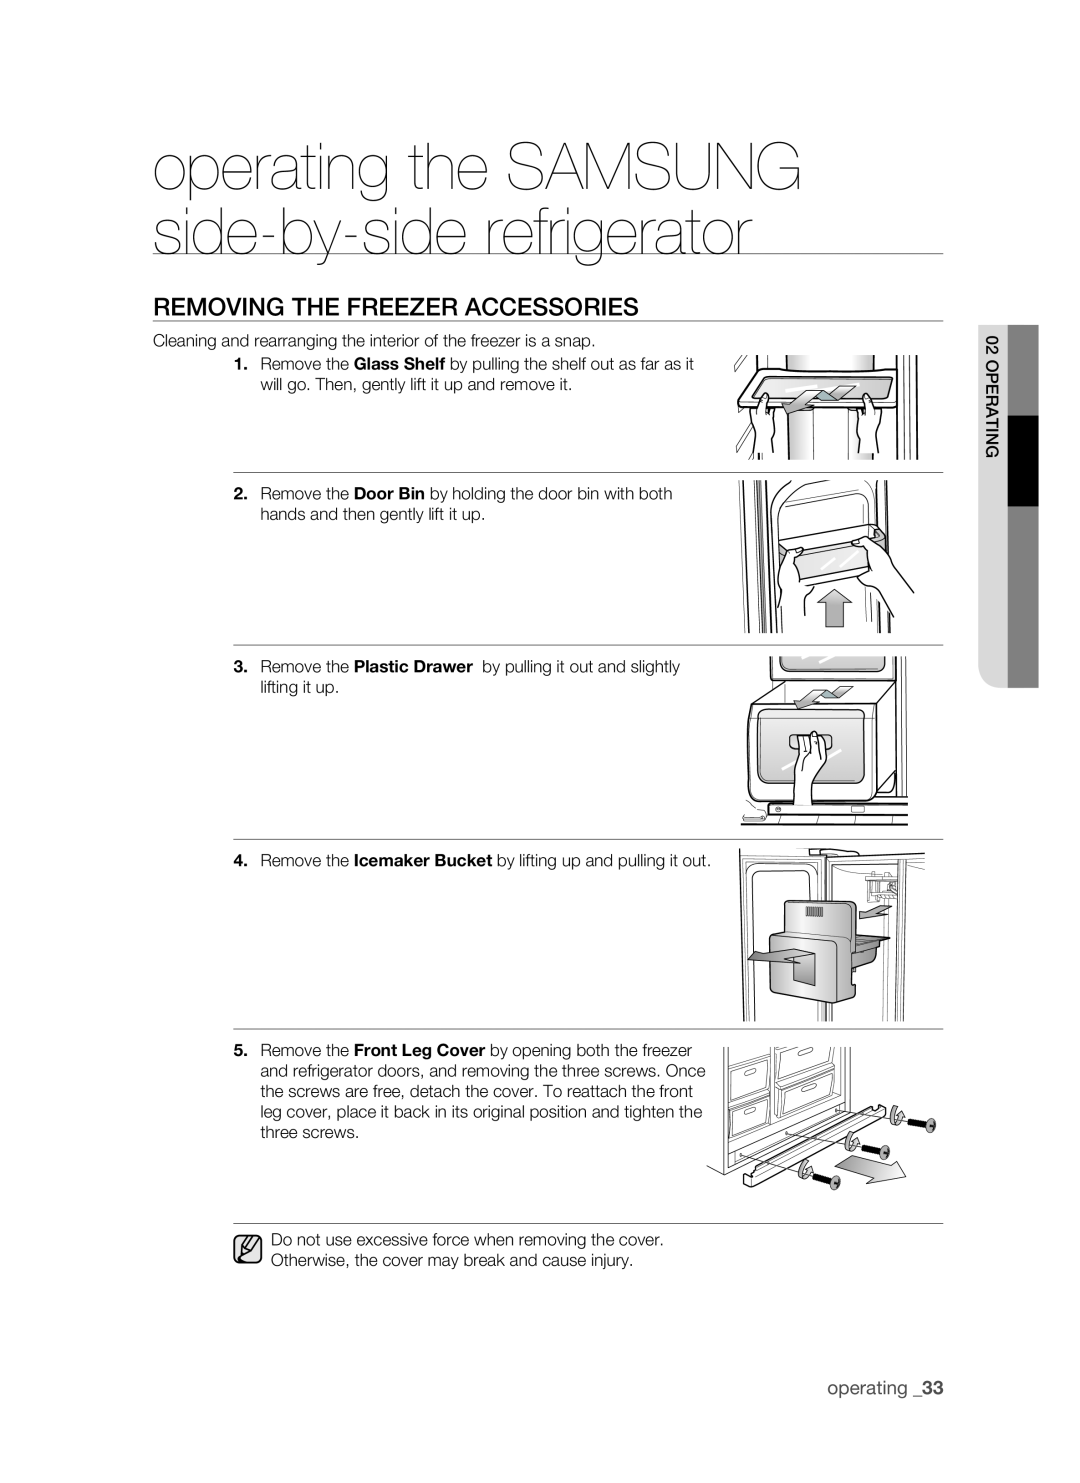 Samsung RSH1D, SRS610HDSS, RSH1K, RSH1J Removing the freezer accessories, operating the SAMSUNG side-by-side refrigerator 